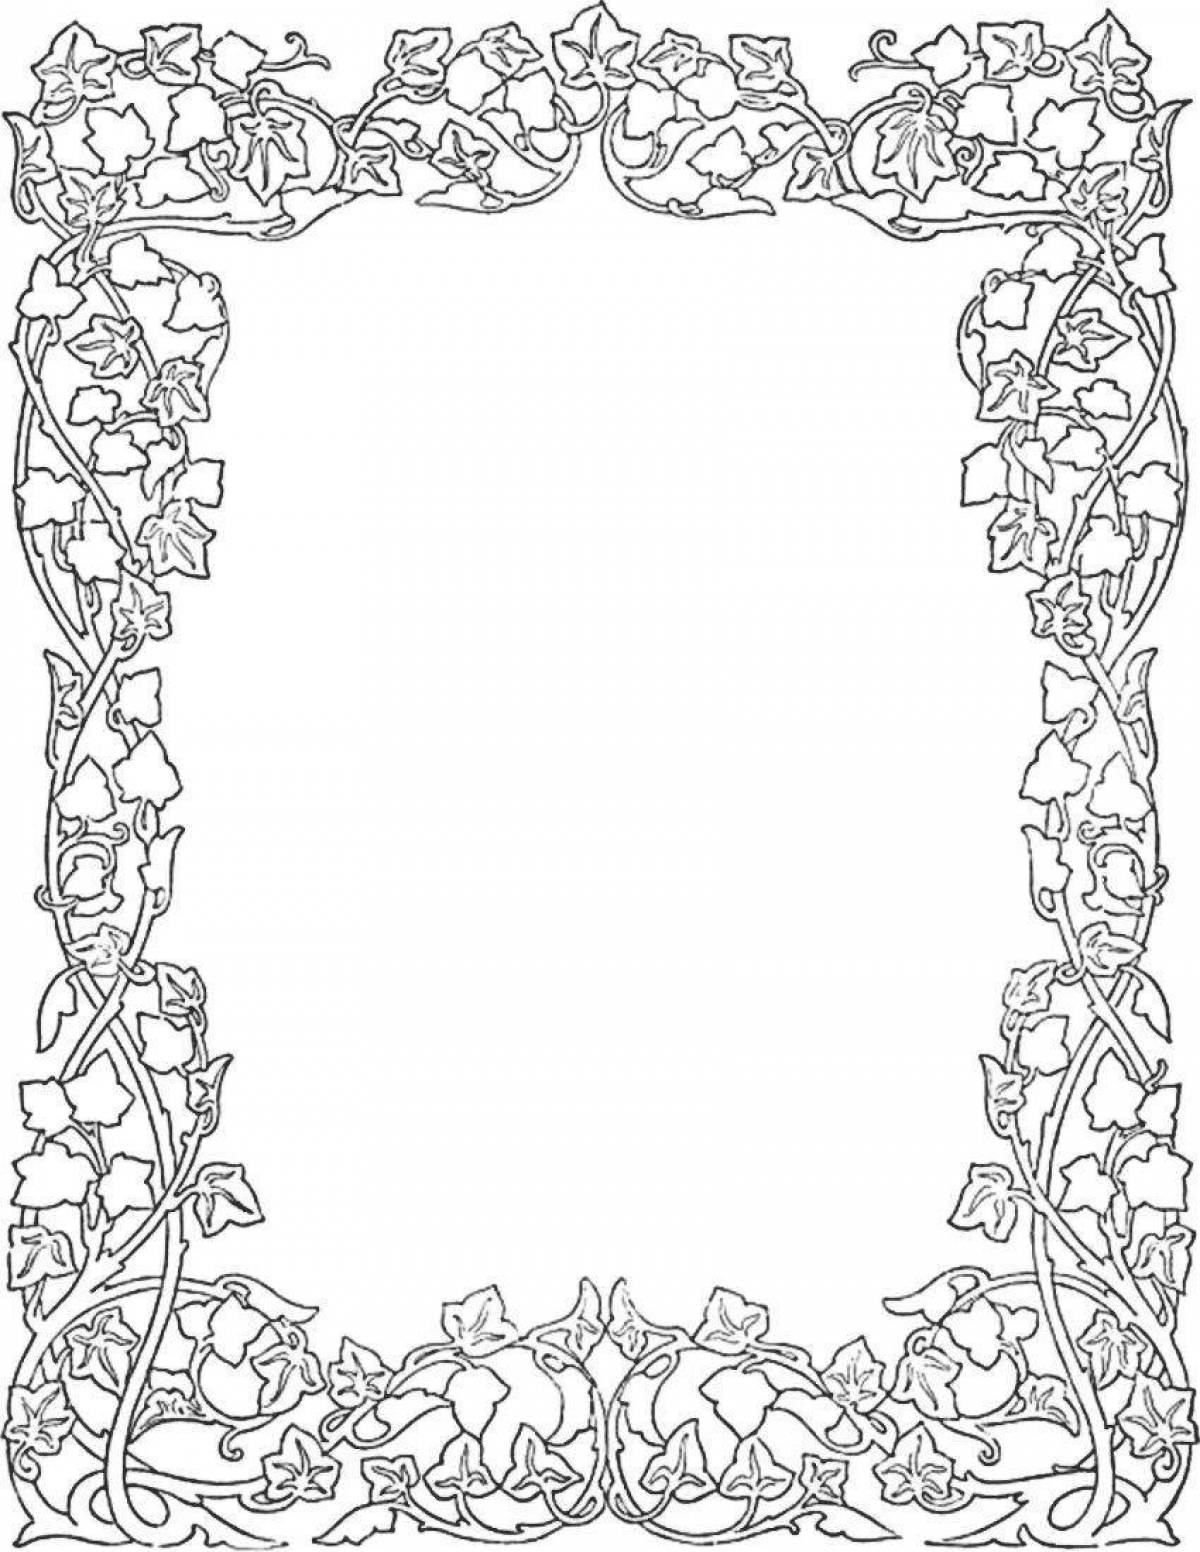 Colorful coloring page title